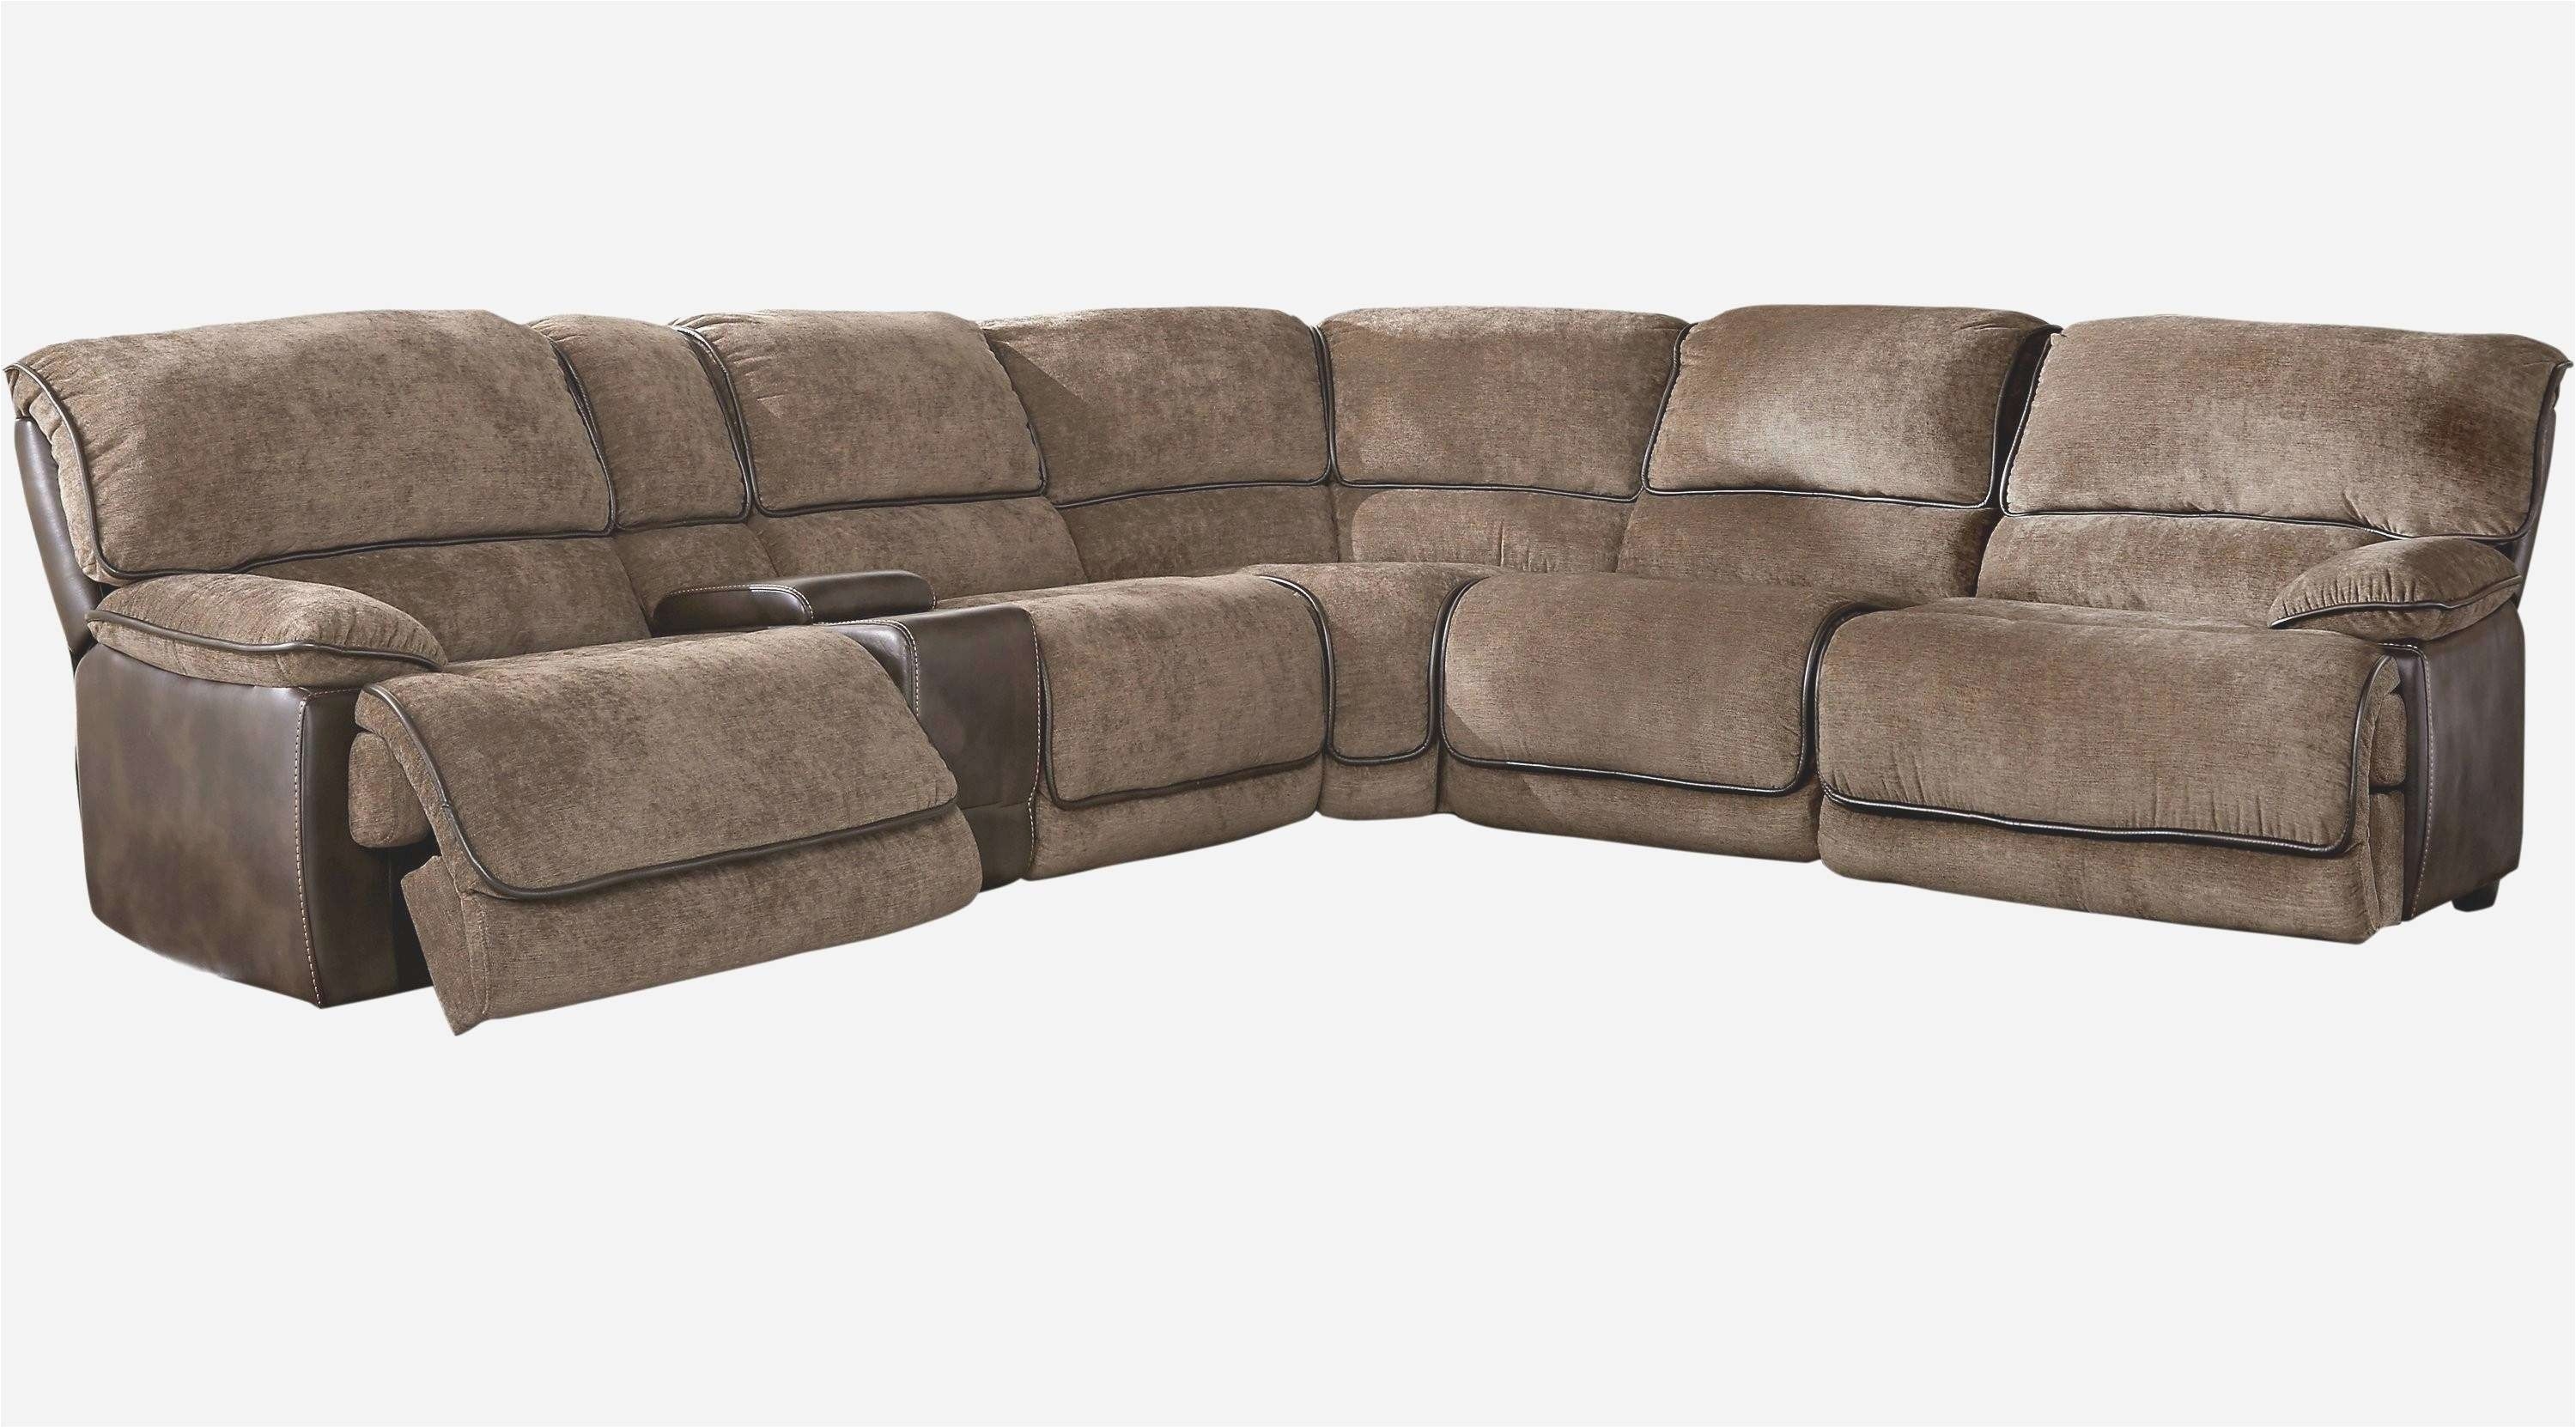 30 sectional with recliner quality slipcover sectional sofa luxury couch cover new sectional couch 0d